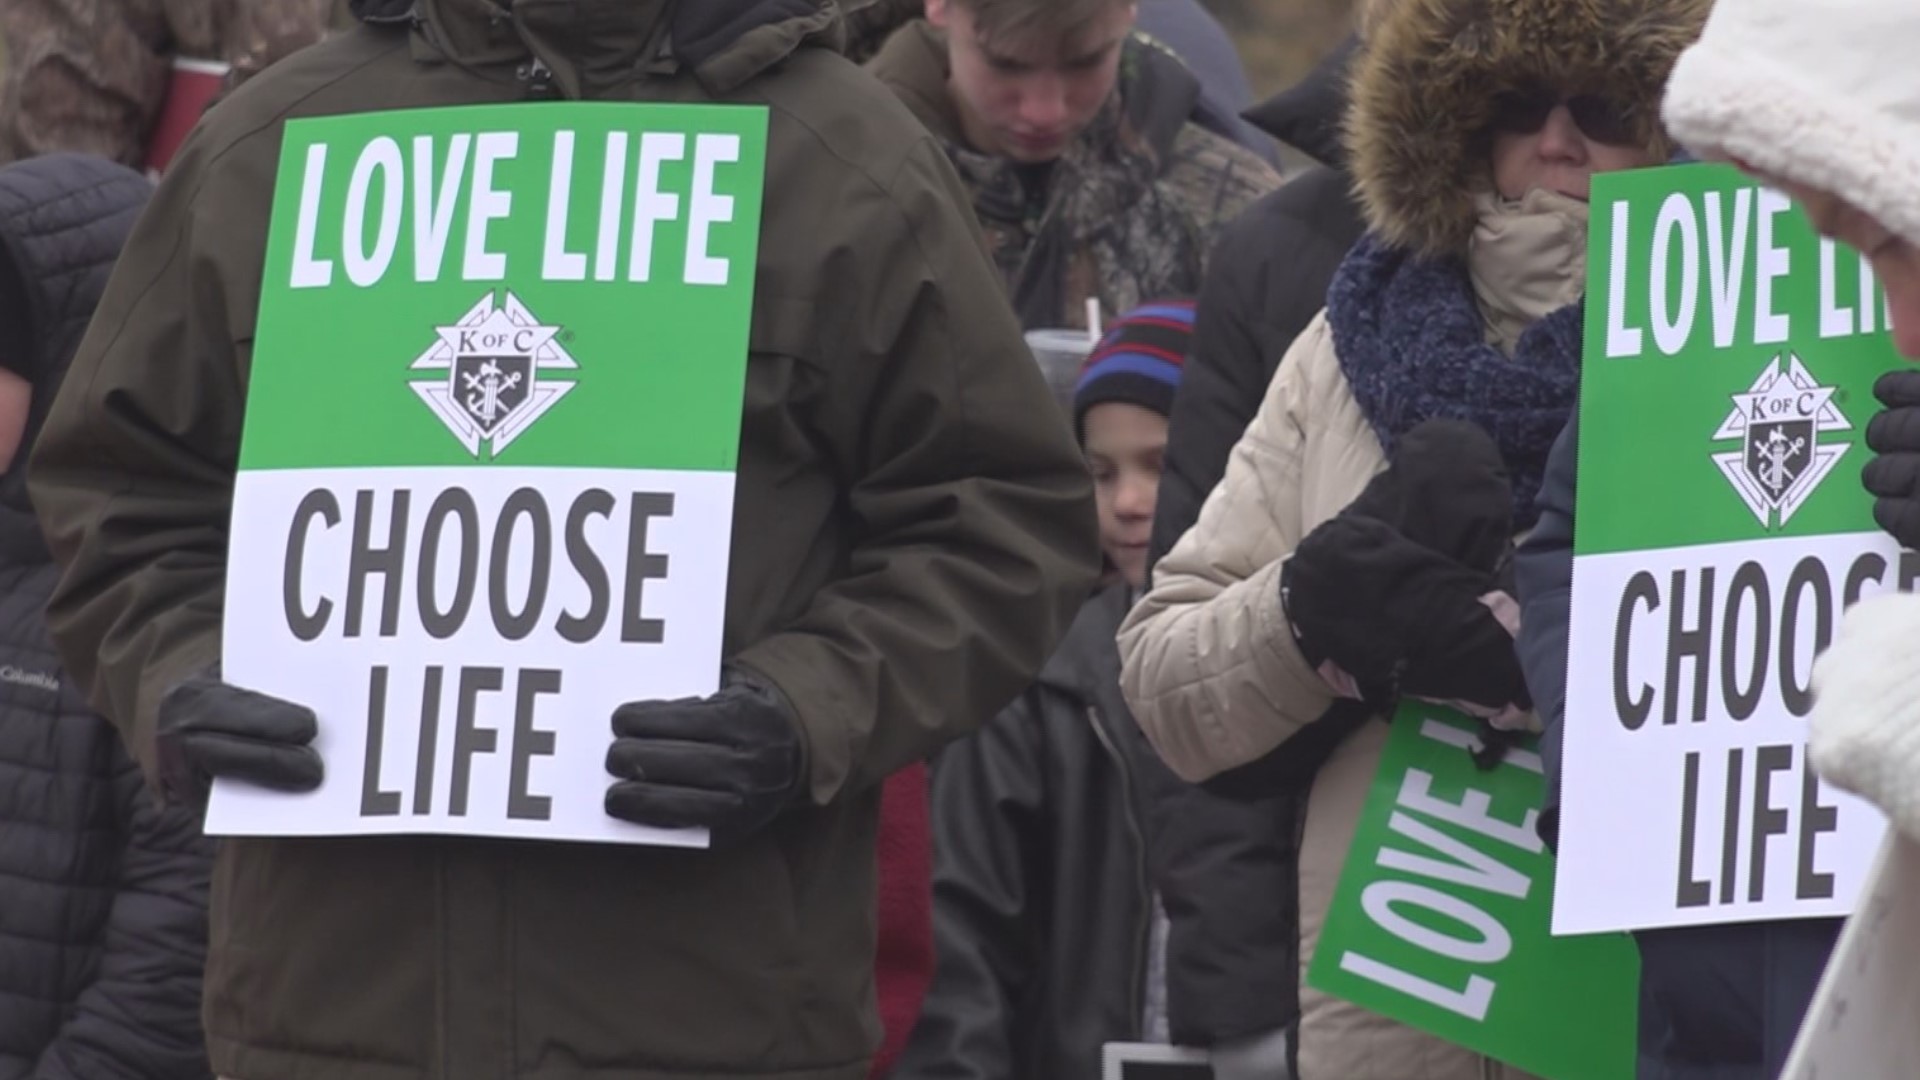 With the rally being the first since the overturning of roe v. Wade, attendees expressed their reasons for showing up and sharing their opinions.